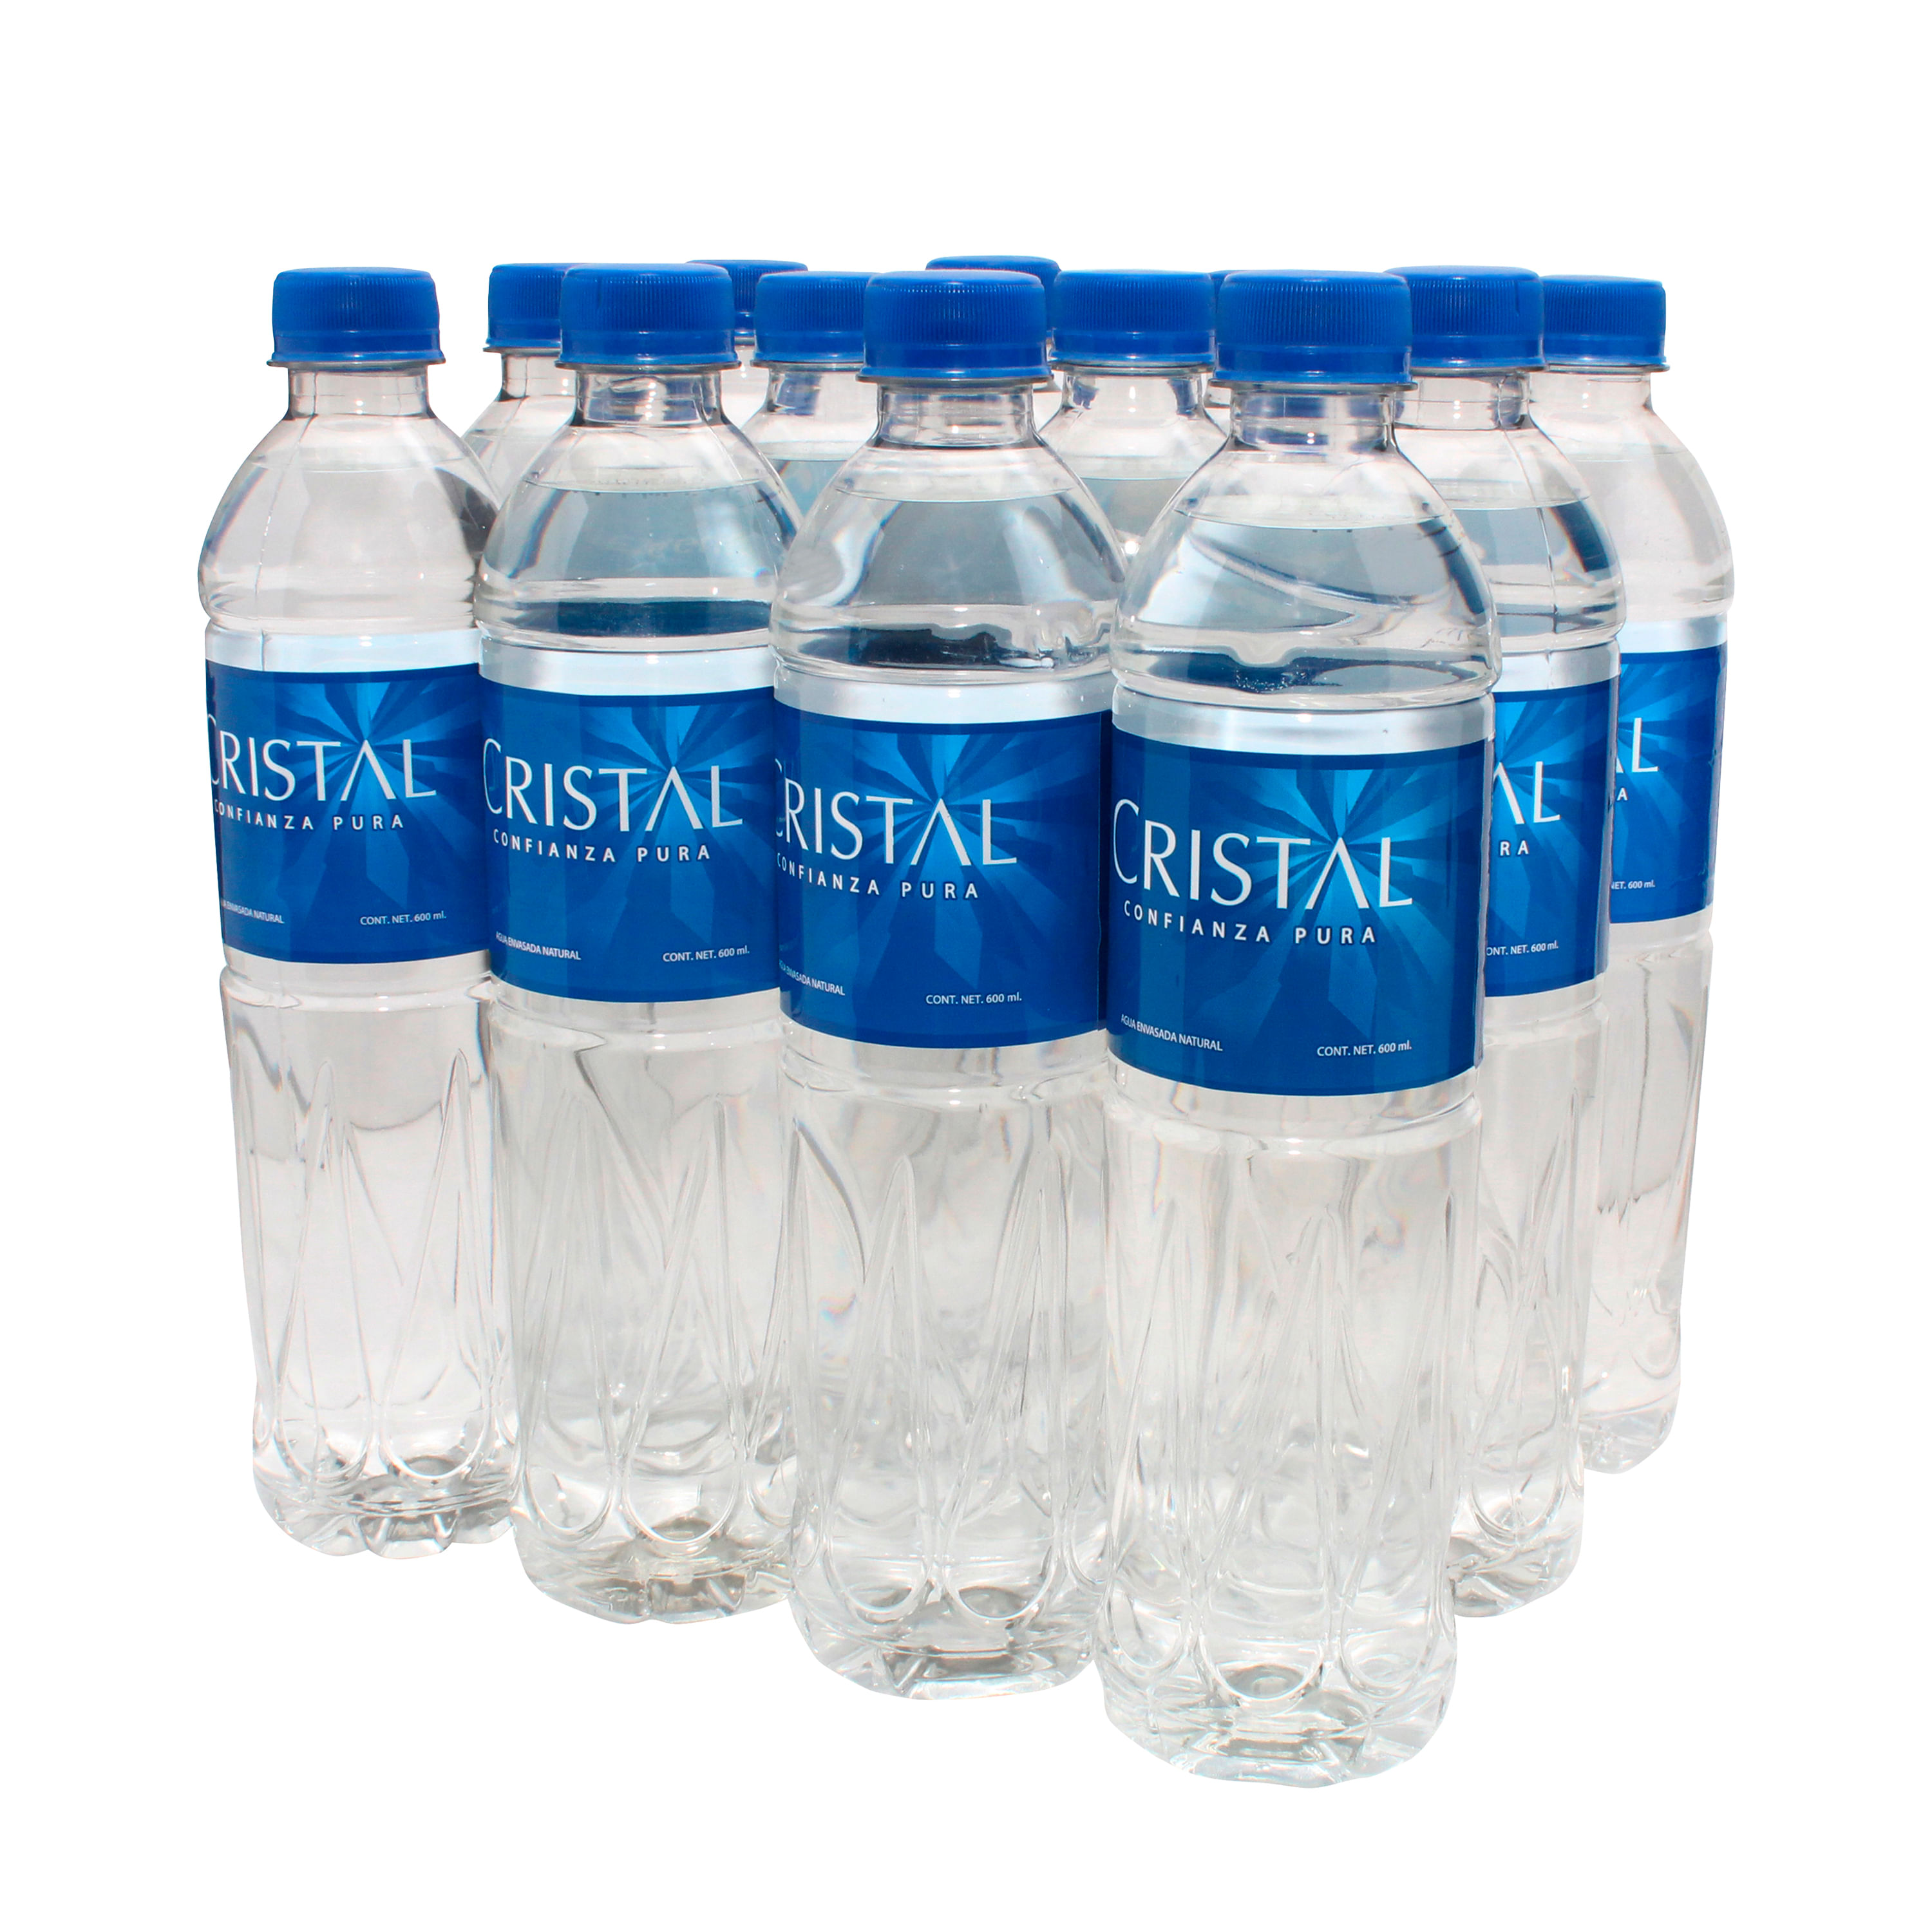 Easy to use and affordable Botella cristal para agua